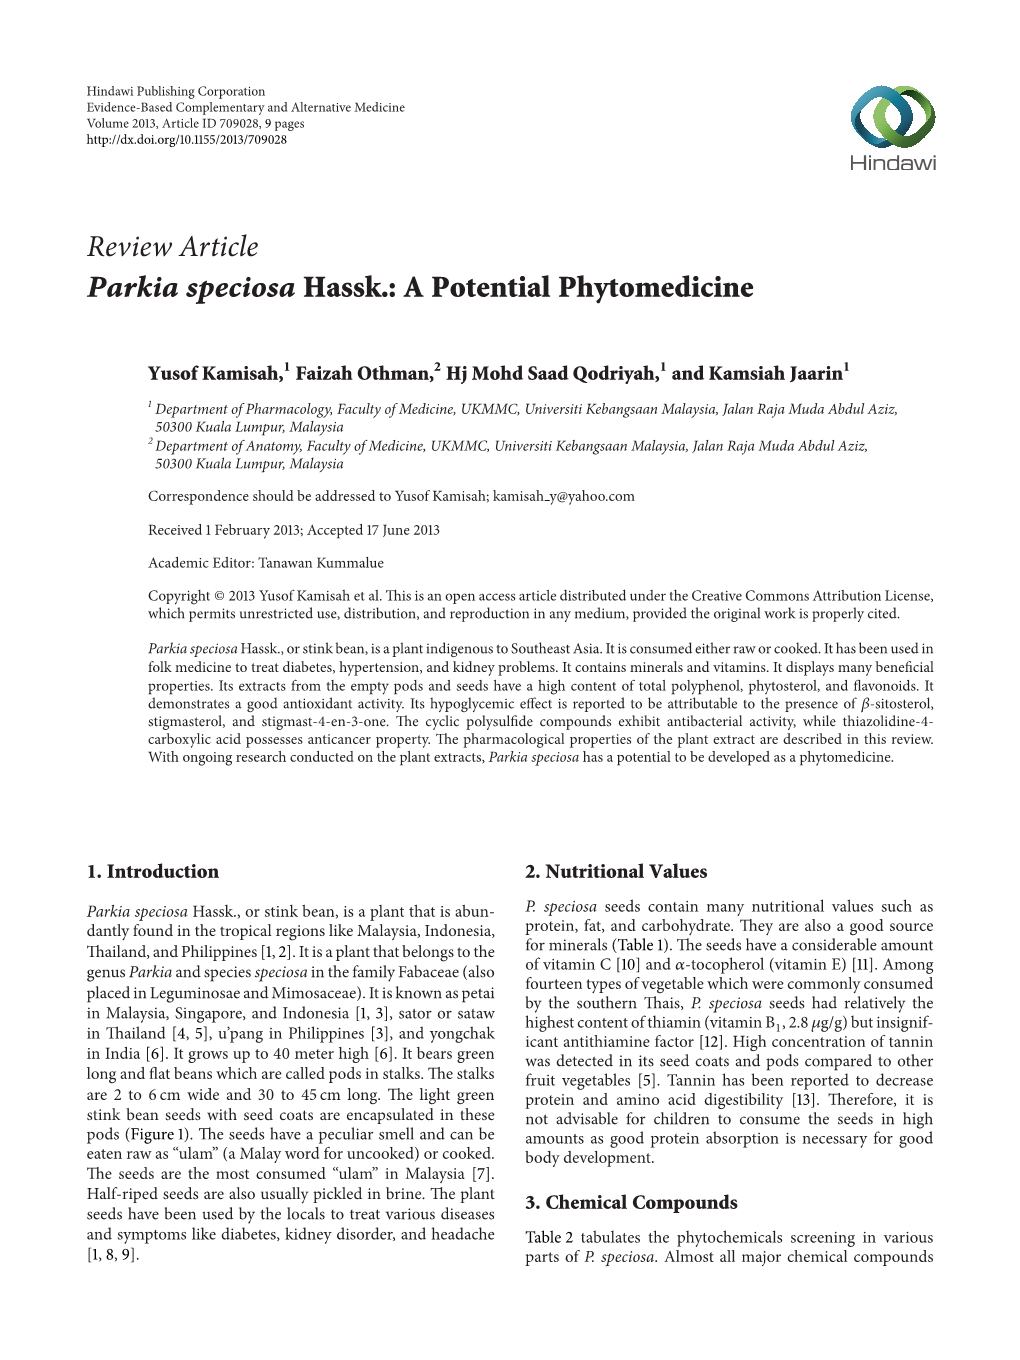 Review Article Parkia Speciosa Hassk.: a Potential Phytomedicine